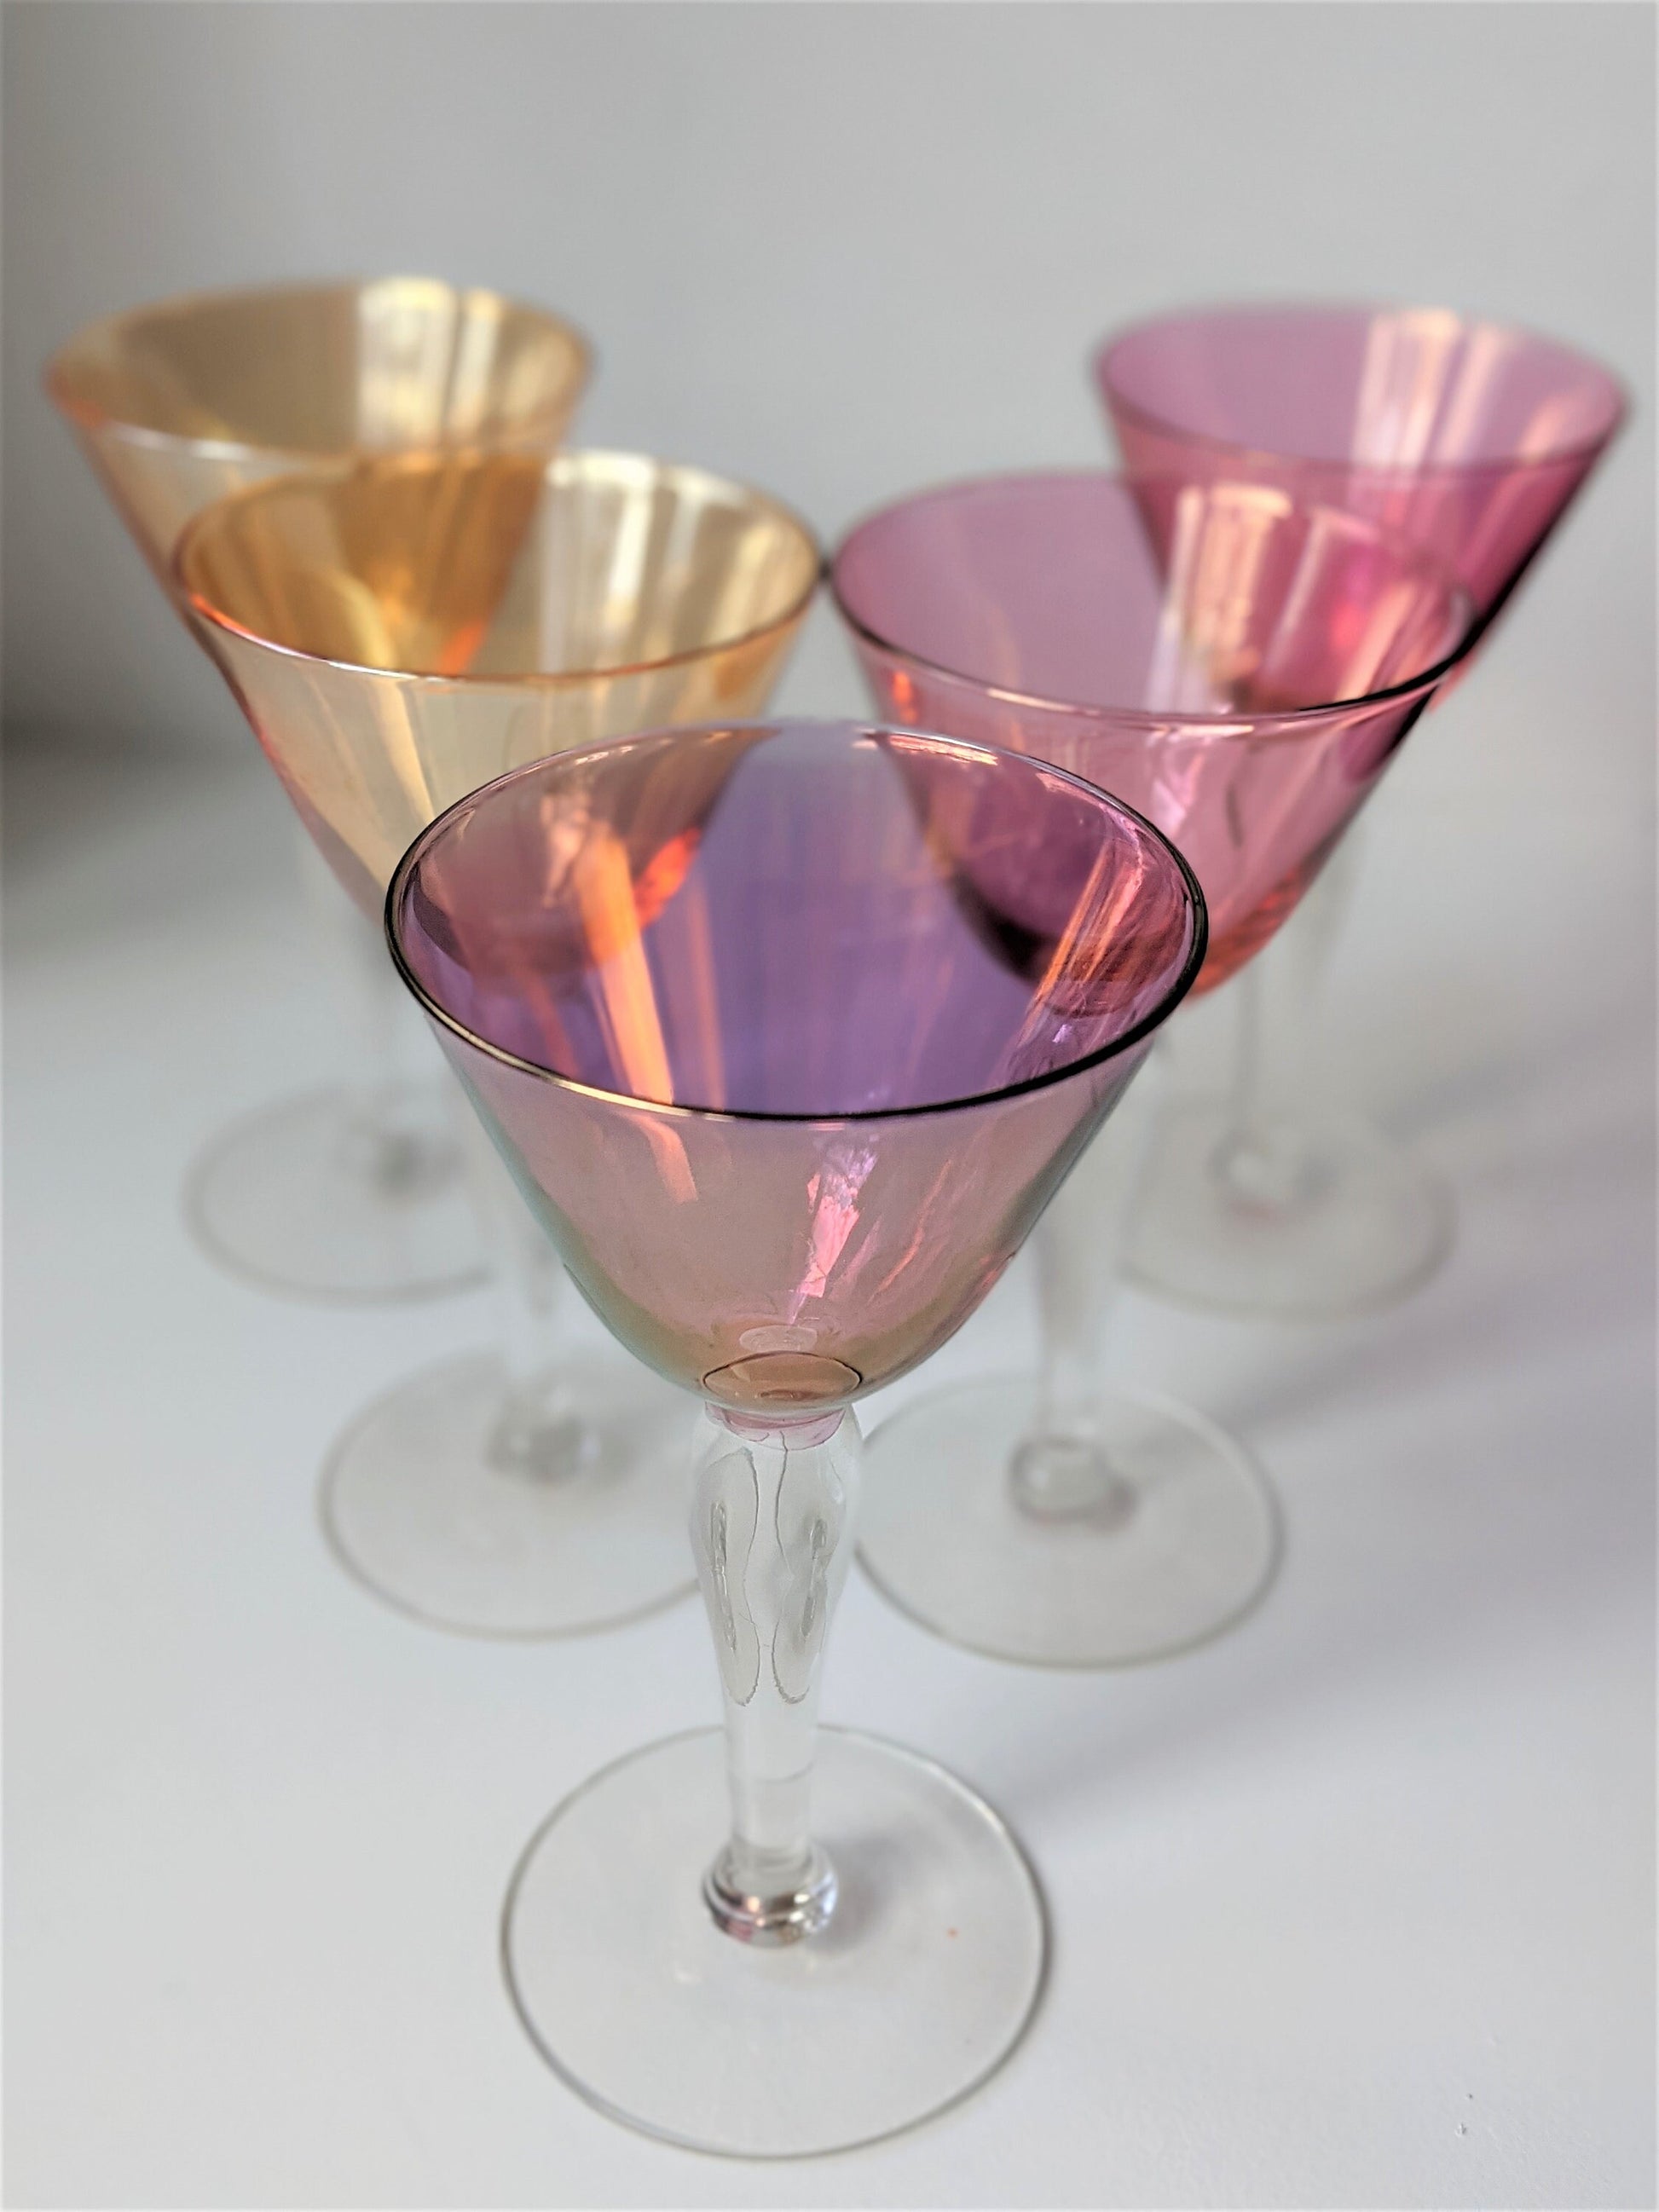 4 Vintage Etched Pink Optic Glass Wine Glasses, 1950's, Pink wine Glasses